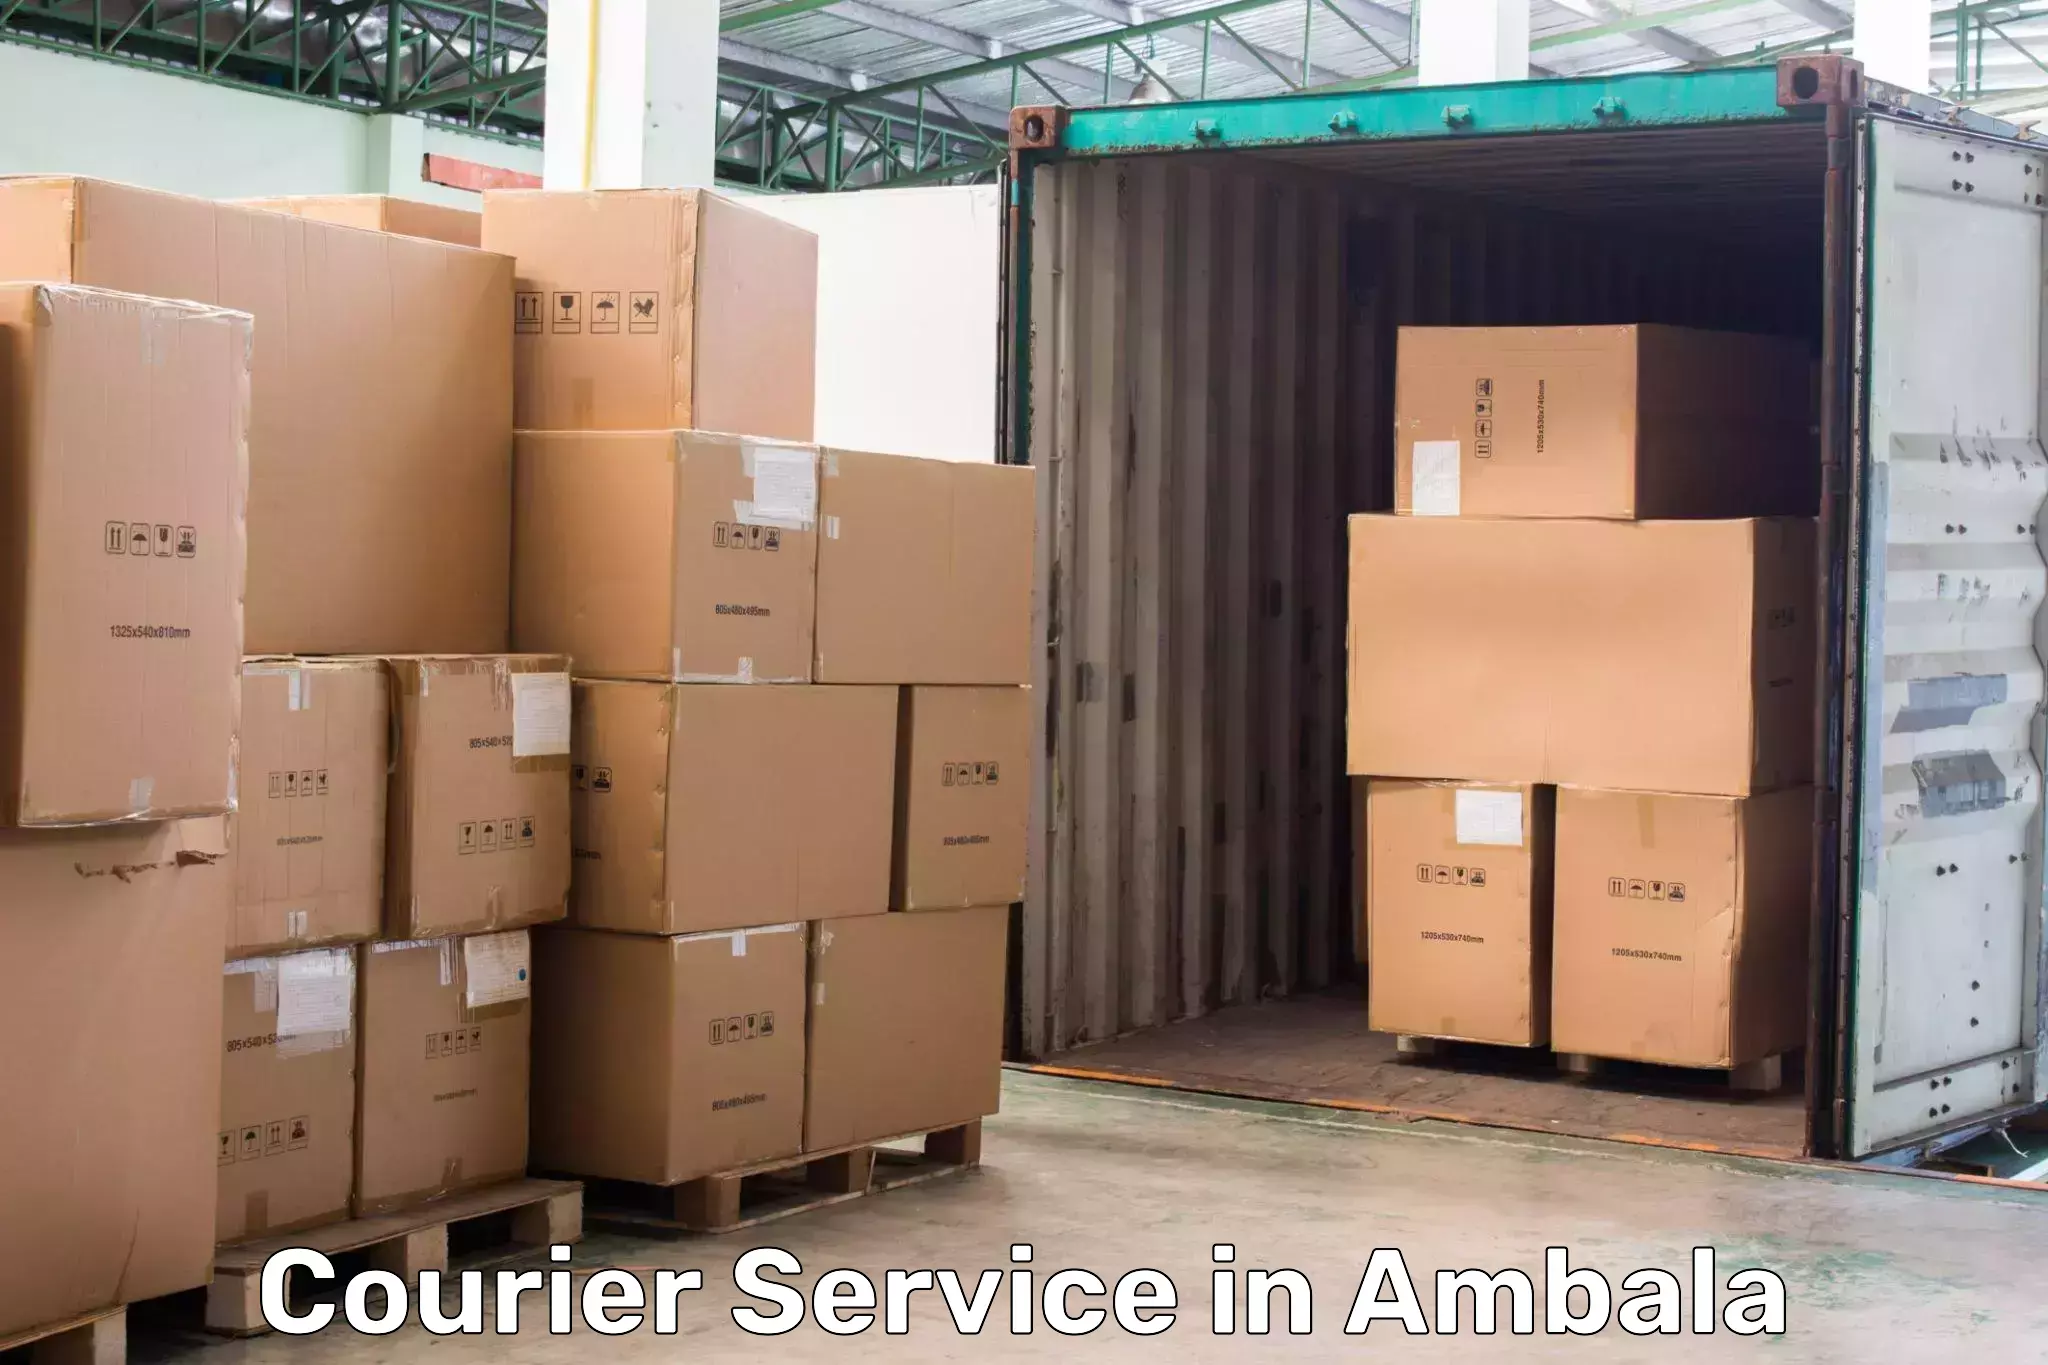 24-hour delivery options in Ambala